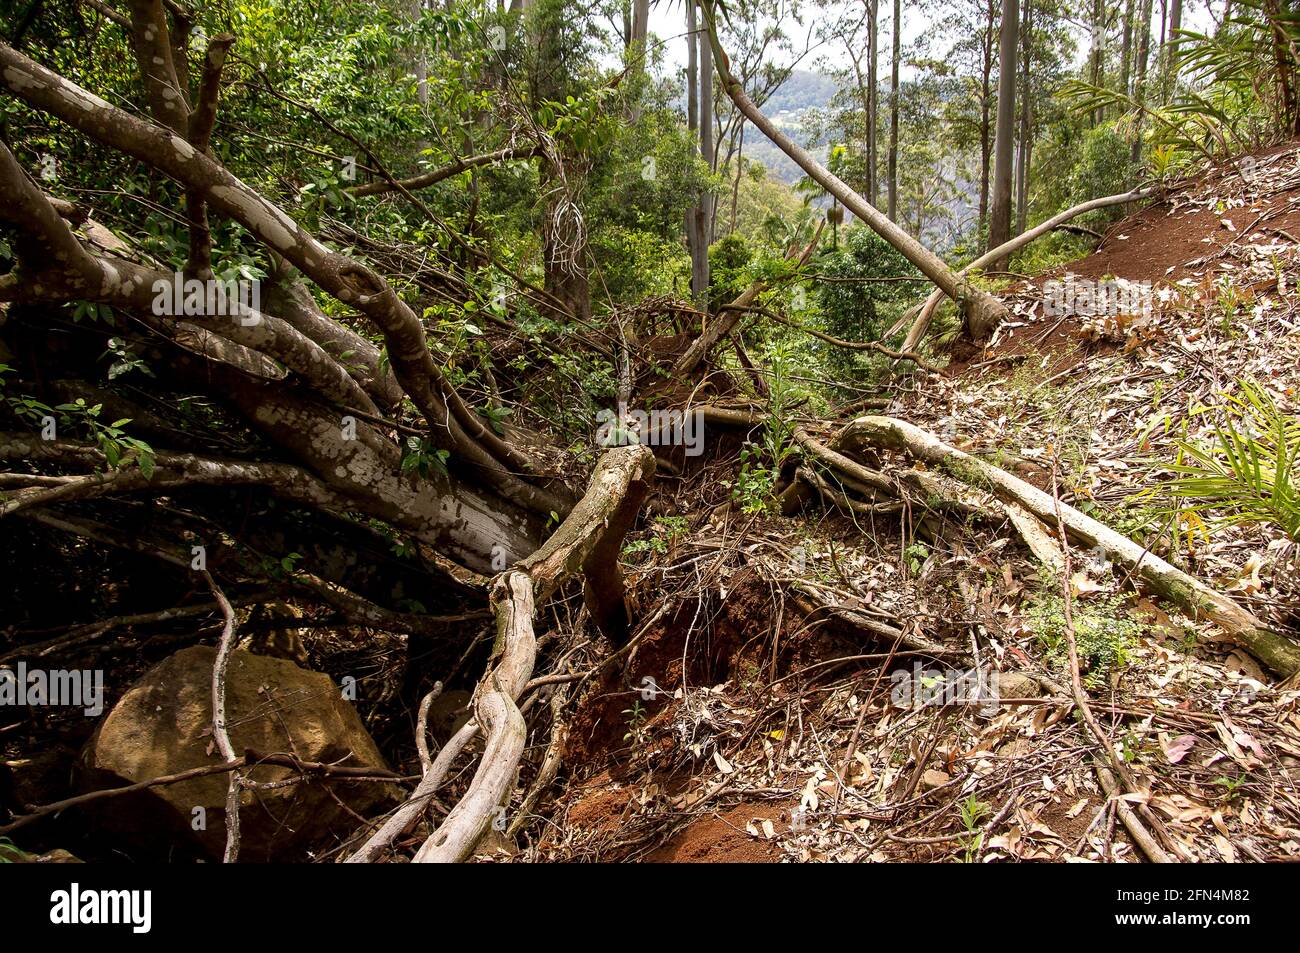 Uprooted and fallen trees and storm damage in lowland sub-tropical rainforest, Tamborine Mountain, Australia. Late spring. Stock Photo